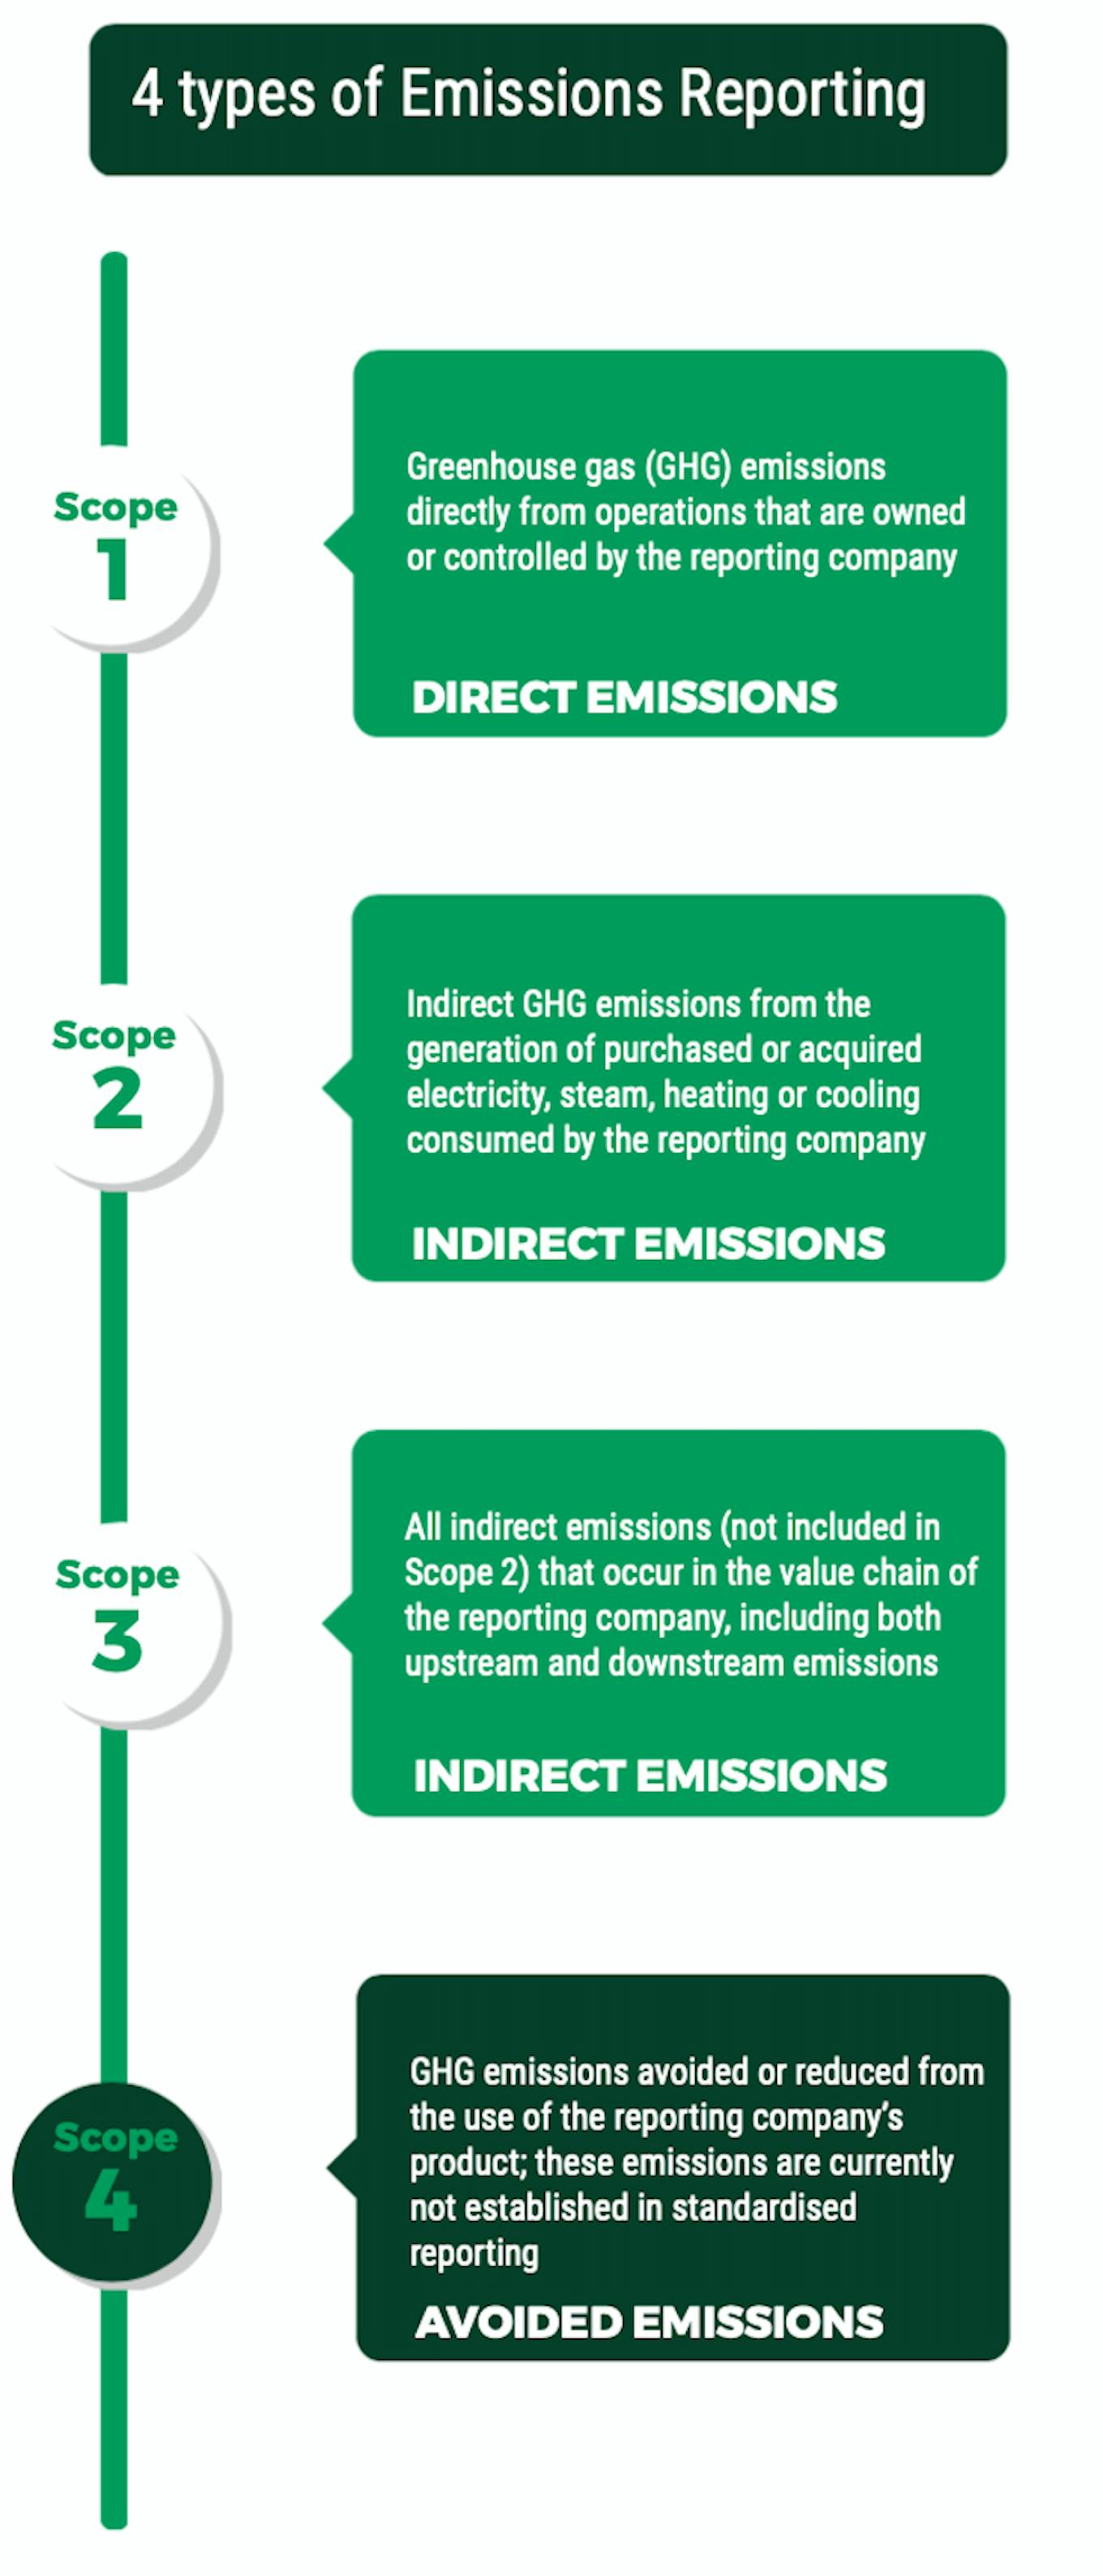 Four scopes of emissions reporting